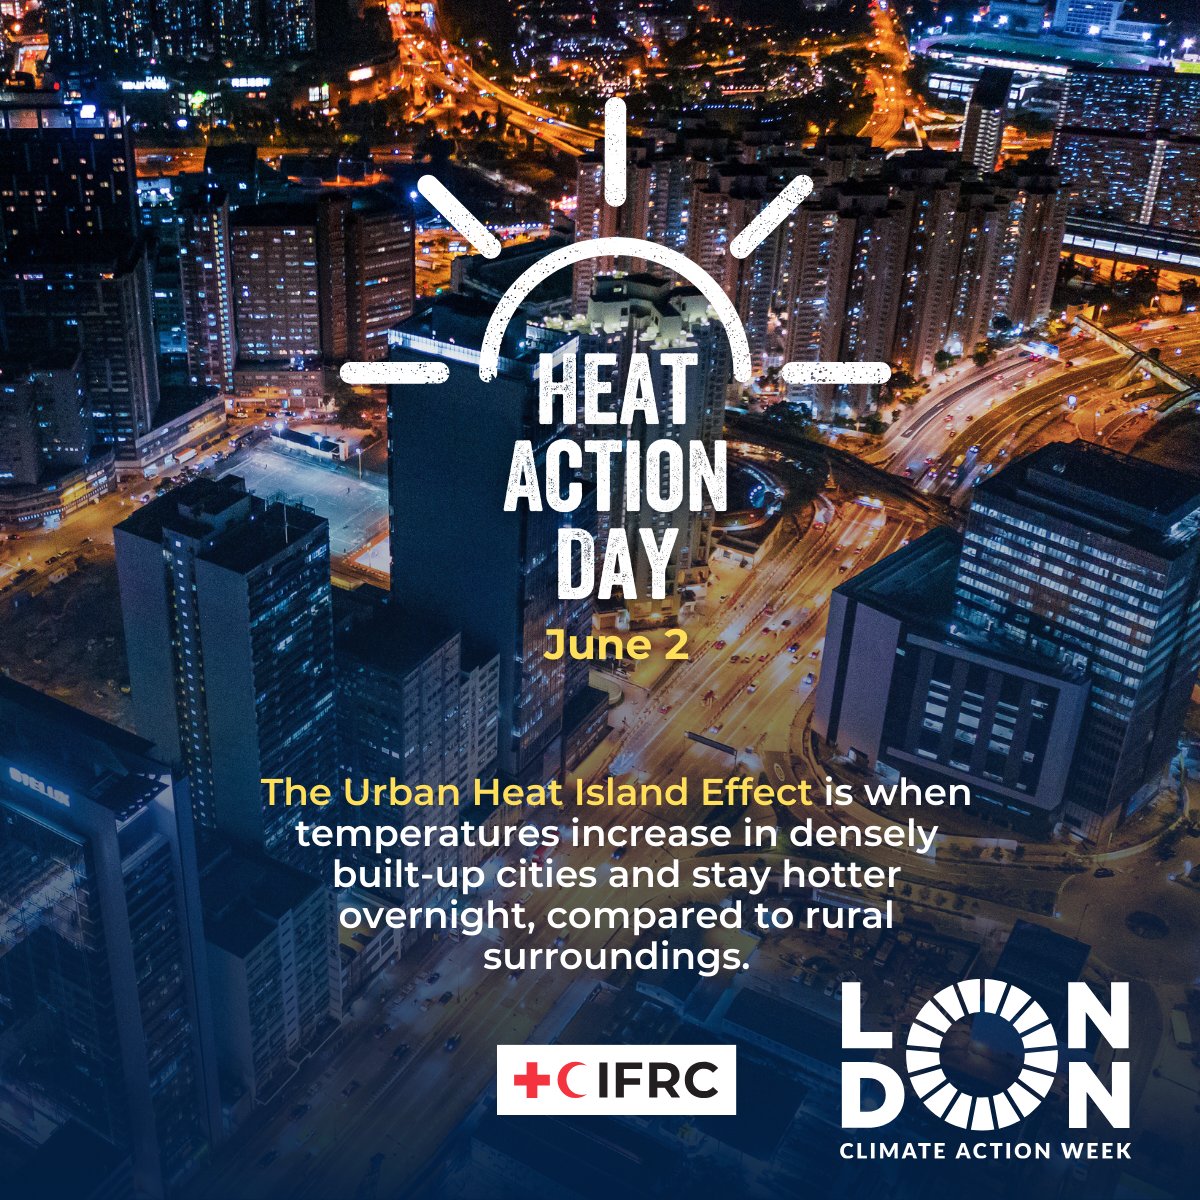 In 2022 London broke all records by breaching 40°C and the Government declared a national emergency The Met Office predicts 2024 could be the hottest year on record 🌡 #LCAW2024 is helping Londoners prepare for heatwaves and extreme weather to build a more resilient city